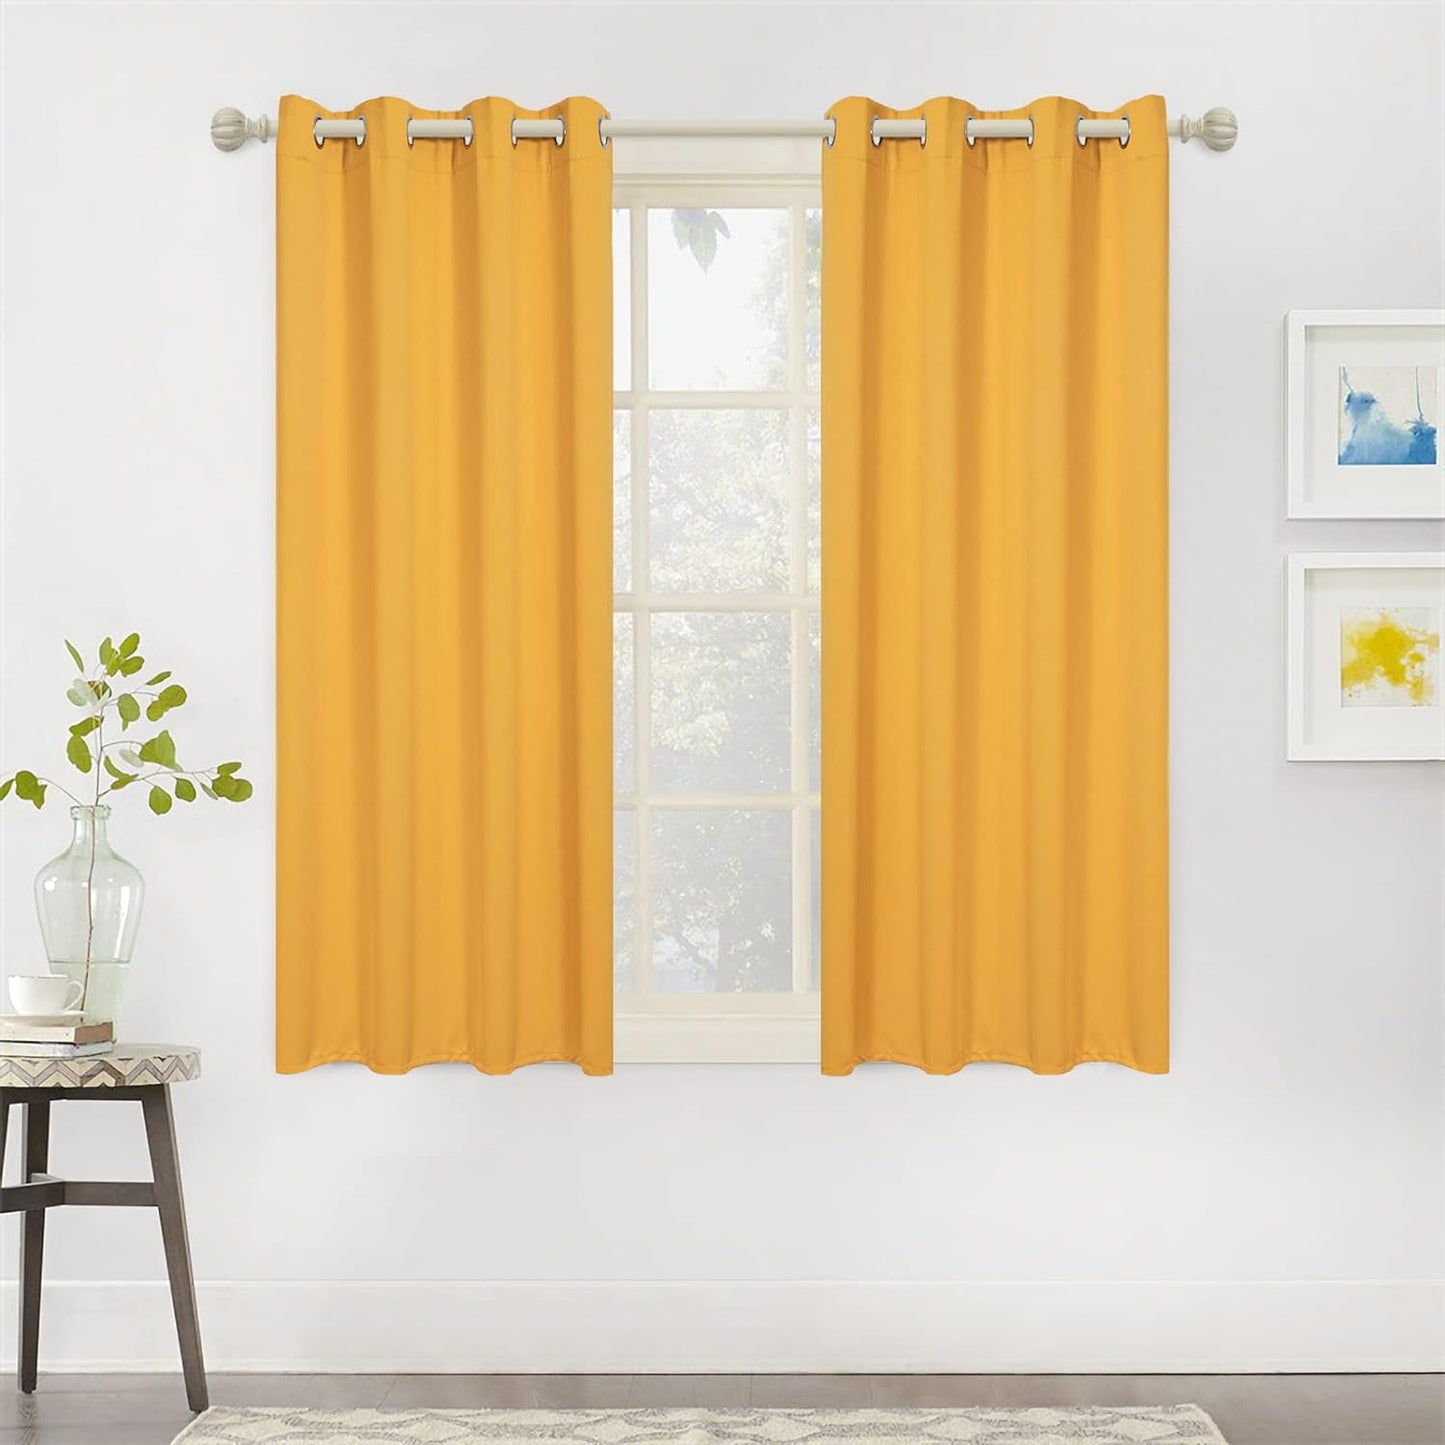 MYSKY HOME Black Curtains for Bedroom 90 Inch Long Blackout Curtains for Living Room 2 Panels Thermal Insulated Grommet Room Darkening Curtains Privacy Protect Window Drapes, 52 X 90 Inches, Black  MYSKY HOME Yellow 52W X 63L 